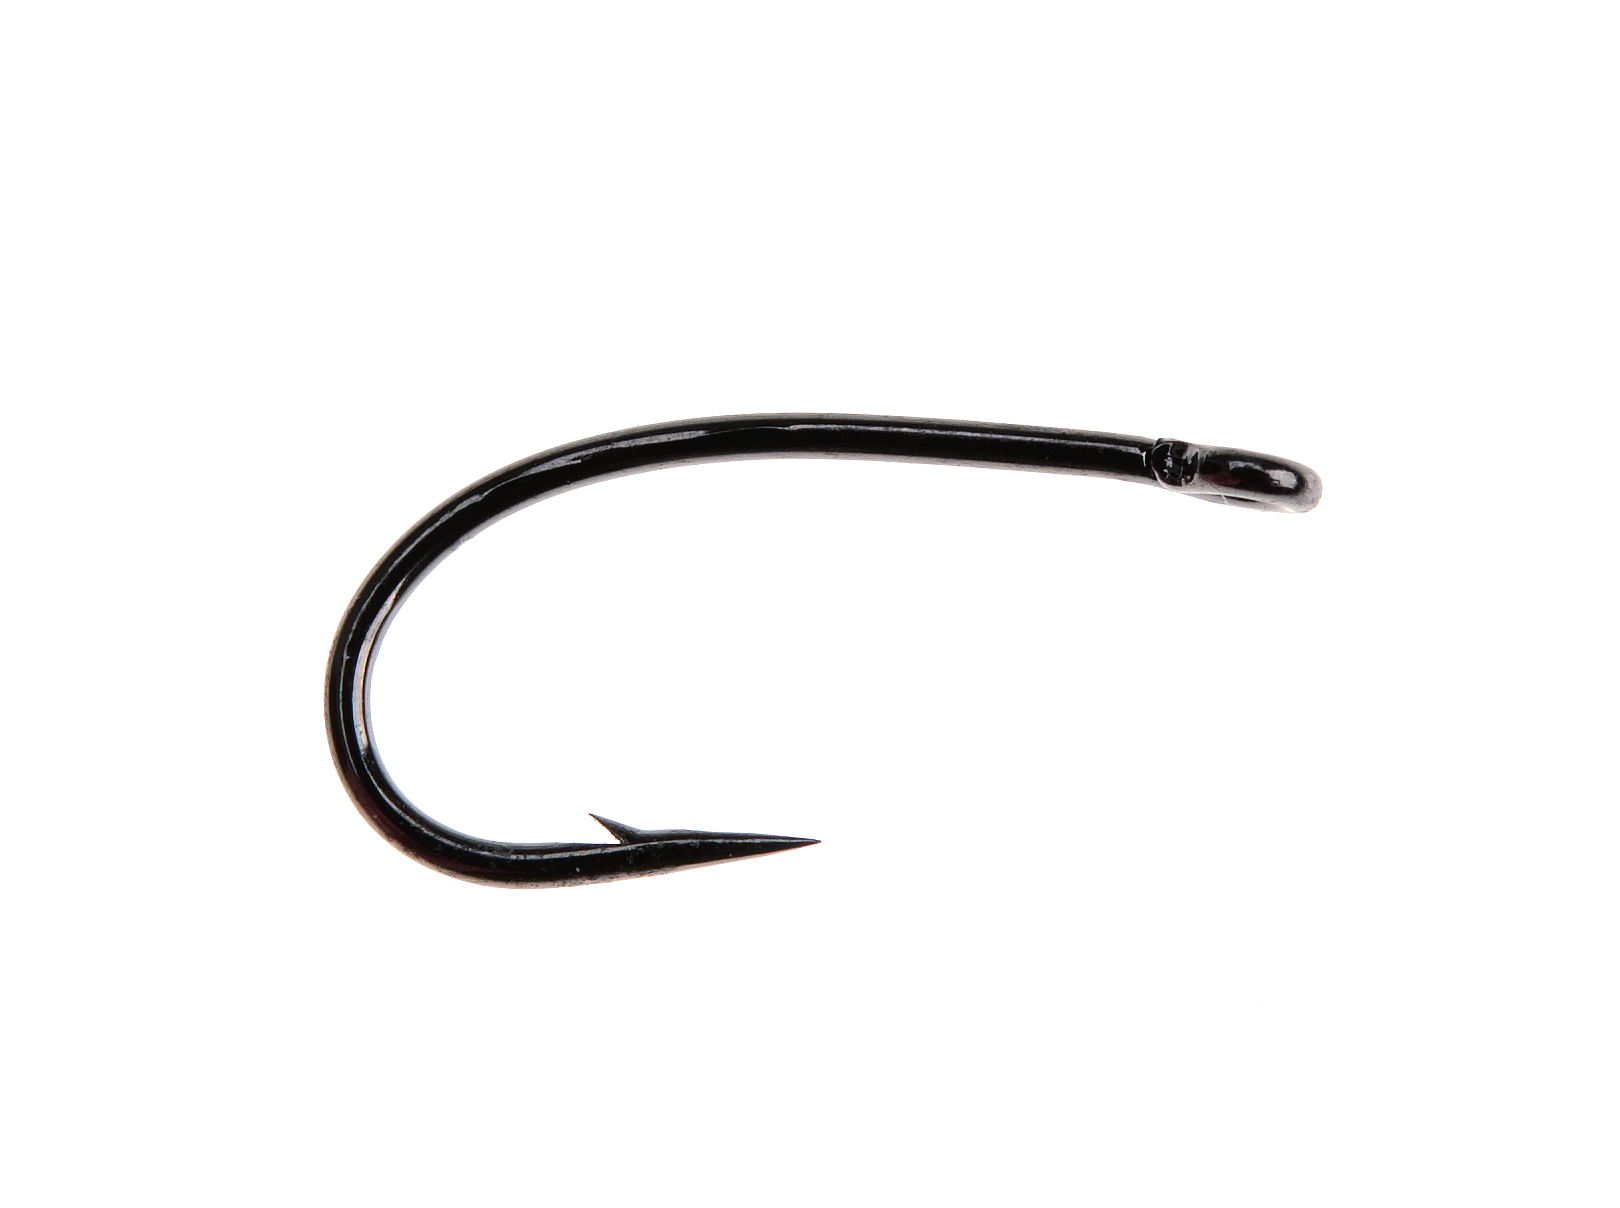 Ahrex FW510 #10 Curved Dry - Ahrex Hooks